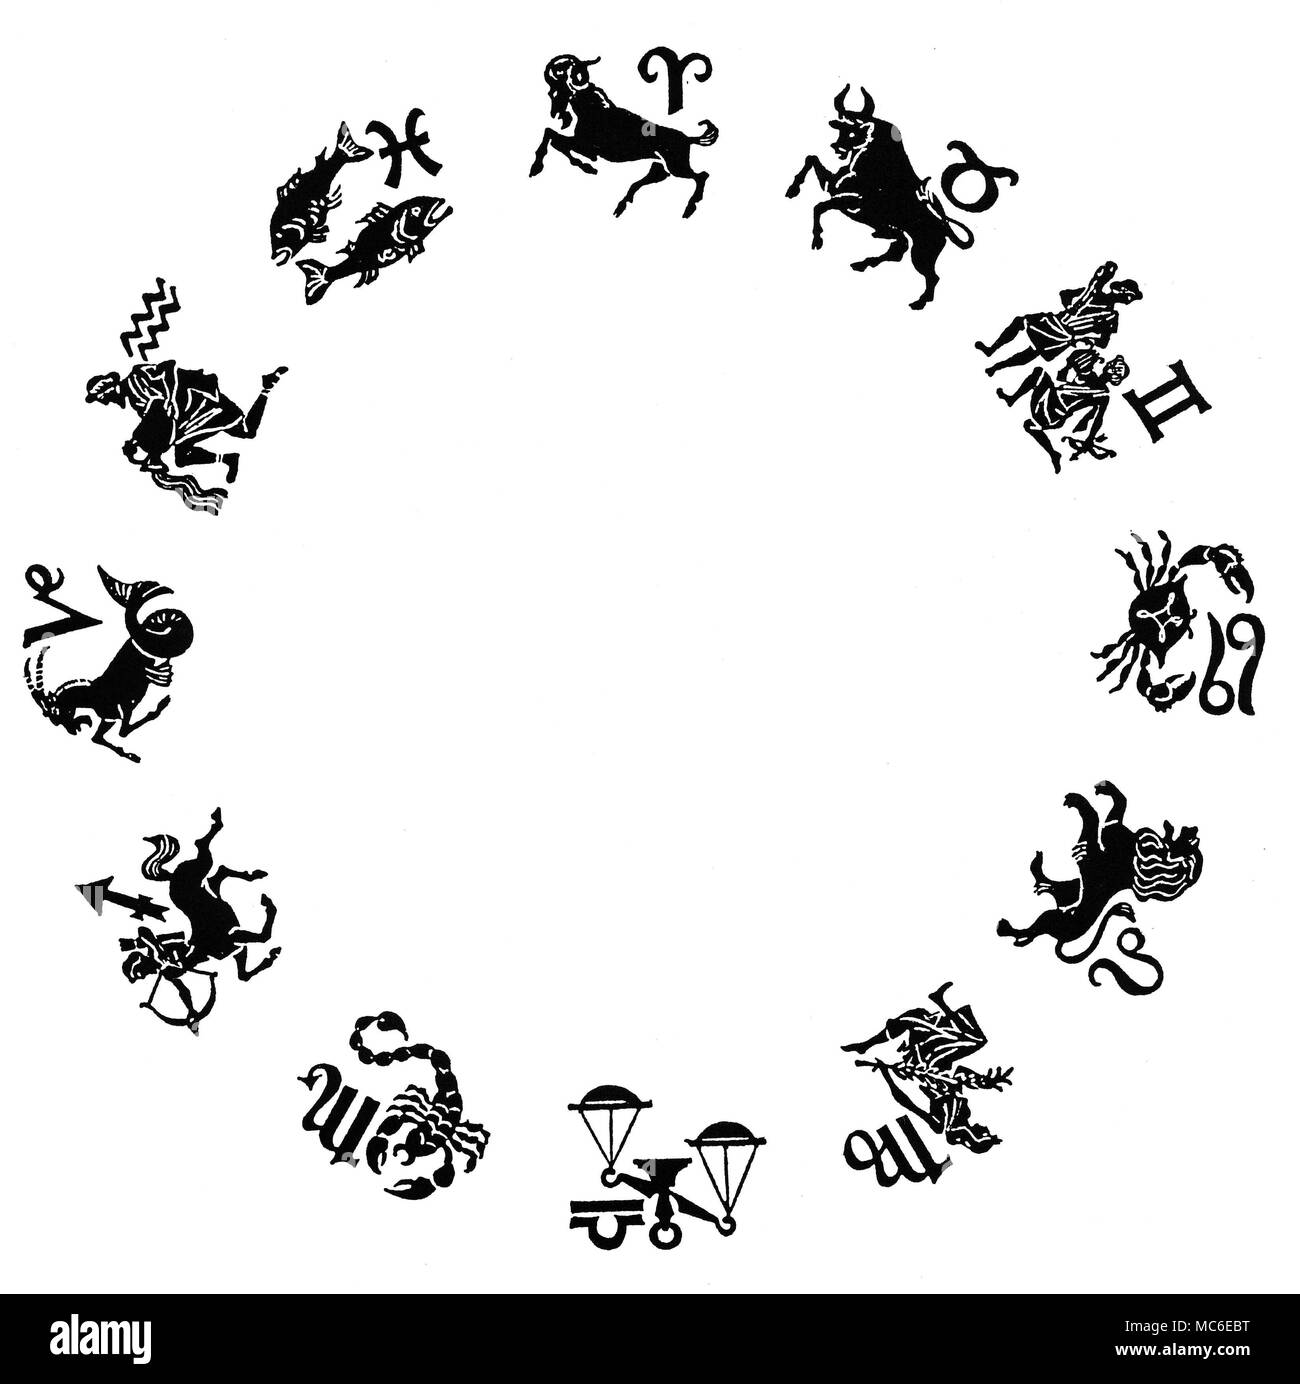 ZODIACS - TWELVE SIGNS Zodiac of twelve images, with corresponding sigils, arranged in a circle. At the top is Aries the Ram - in clockwise direction, follow Taurus the Bull, Gemini the Twins, Can cer the Crab, Leo the Lion, Virgo the Virgin, Libra the Scales, Scorpio the Scorpion, Sagittarius the man-horse (or Centaur with bow and arrow), Capricorn the Goat-fish, Aquarius the Water-pourer, and the two fishes of Pisces. Designed circa 1920. Stock Photo